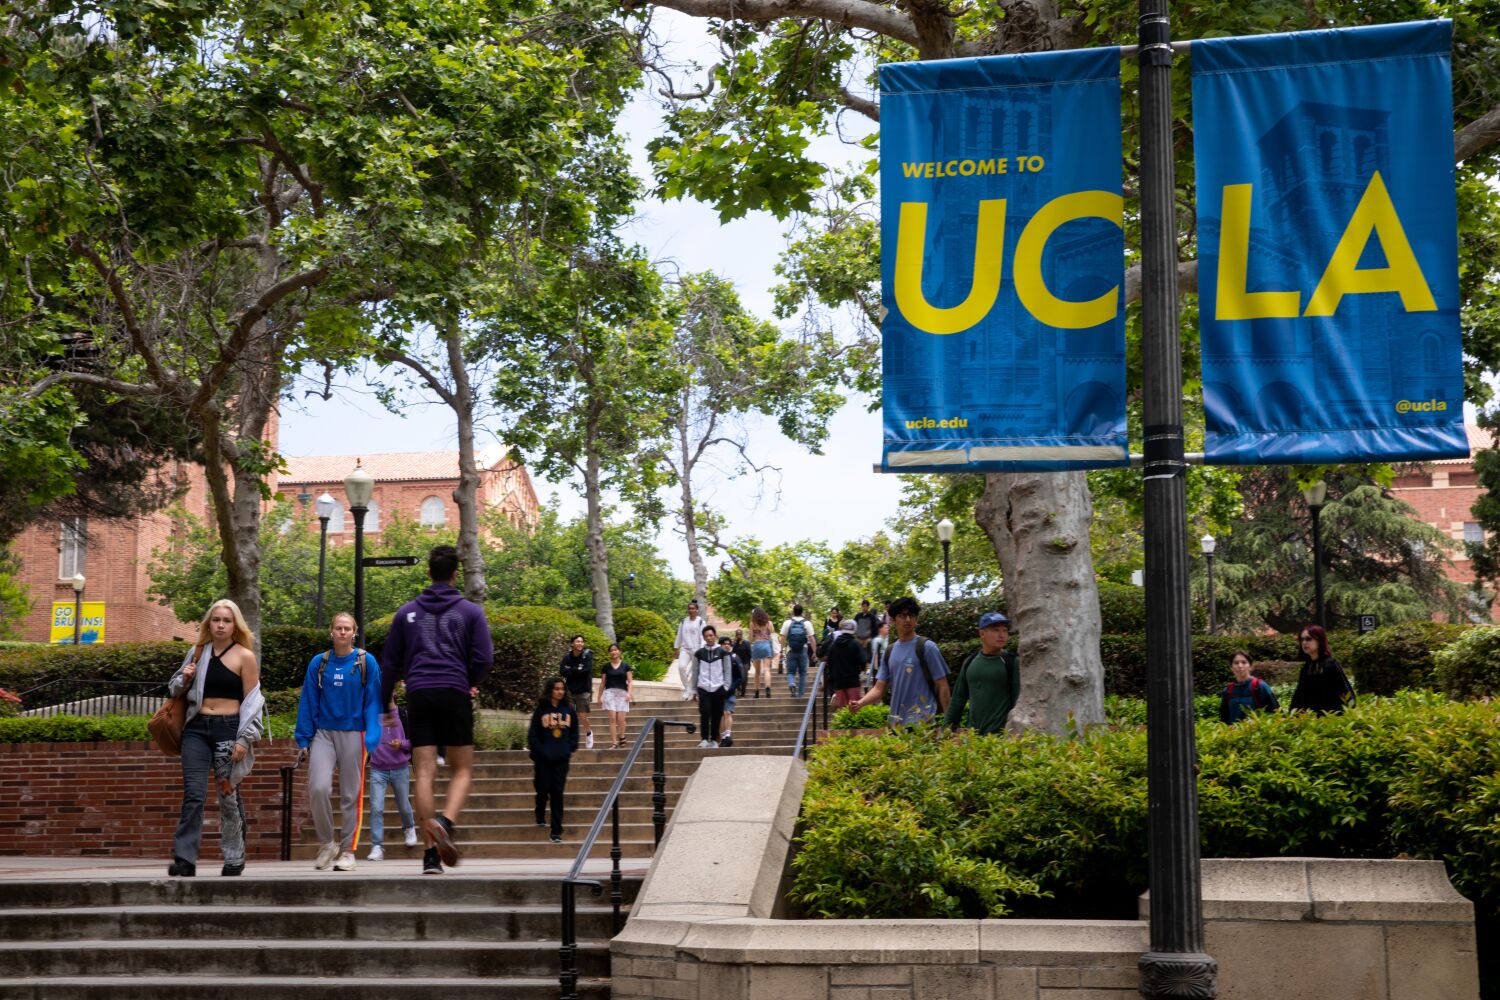 Opinion: Want more diversity in schools? Copy the University of California and look to community colleges